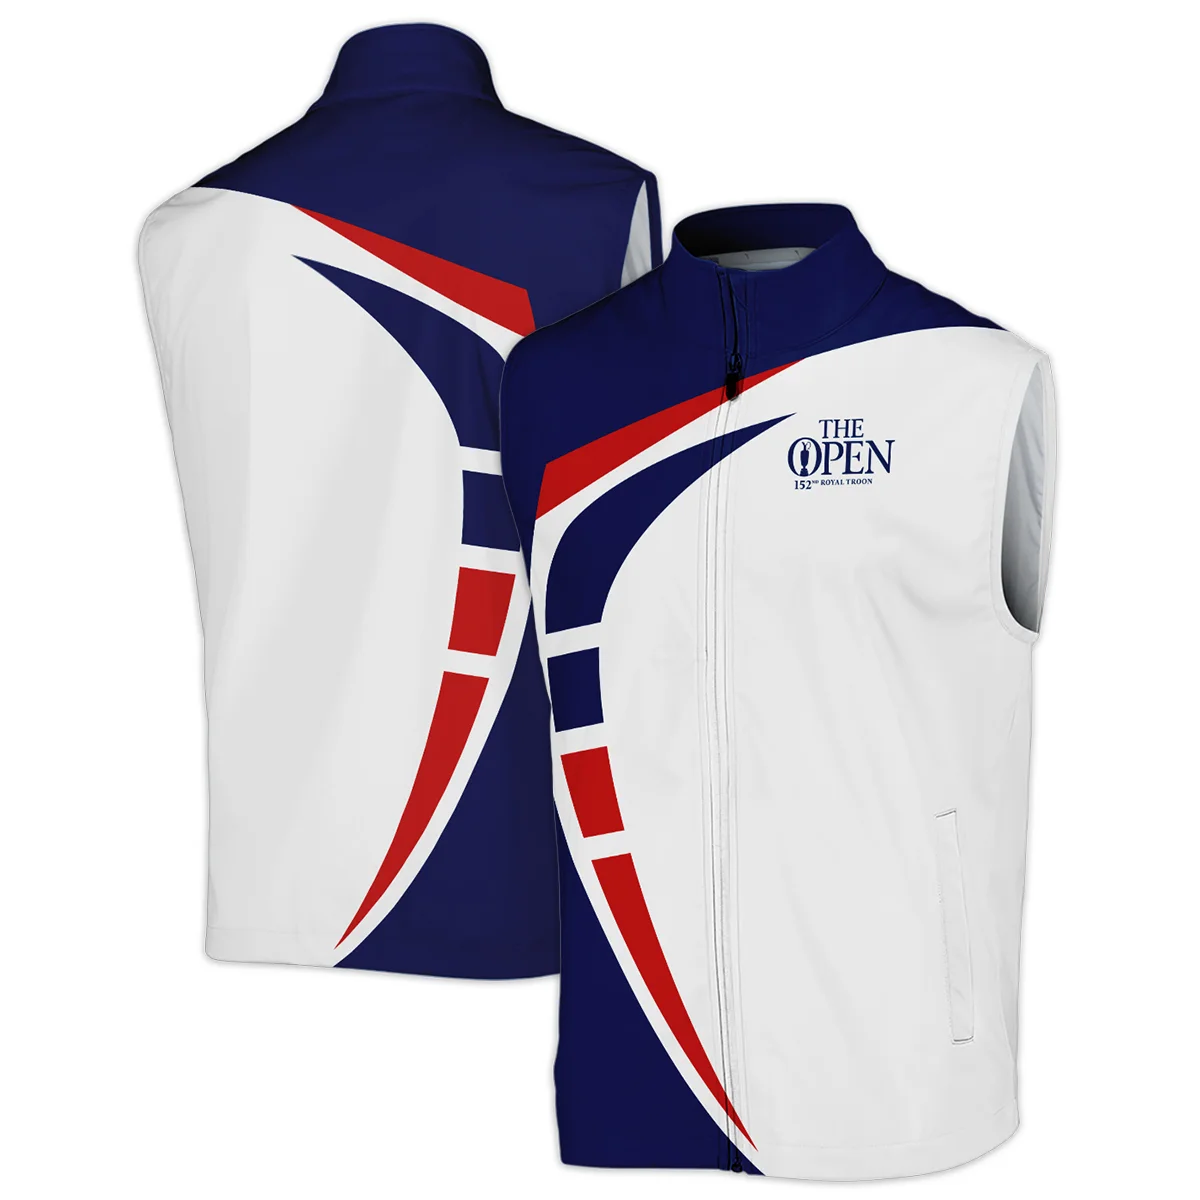 152nd Open Championship Rolex White Blue Red Pattern Background Sleeveless Jacket All Over Prints HOTOP270624A03ROXSJK